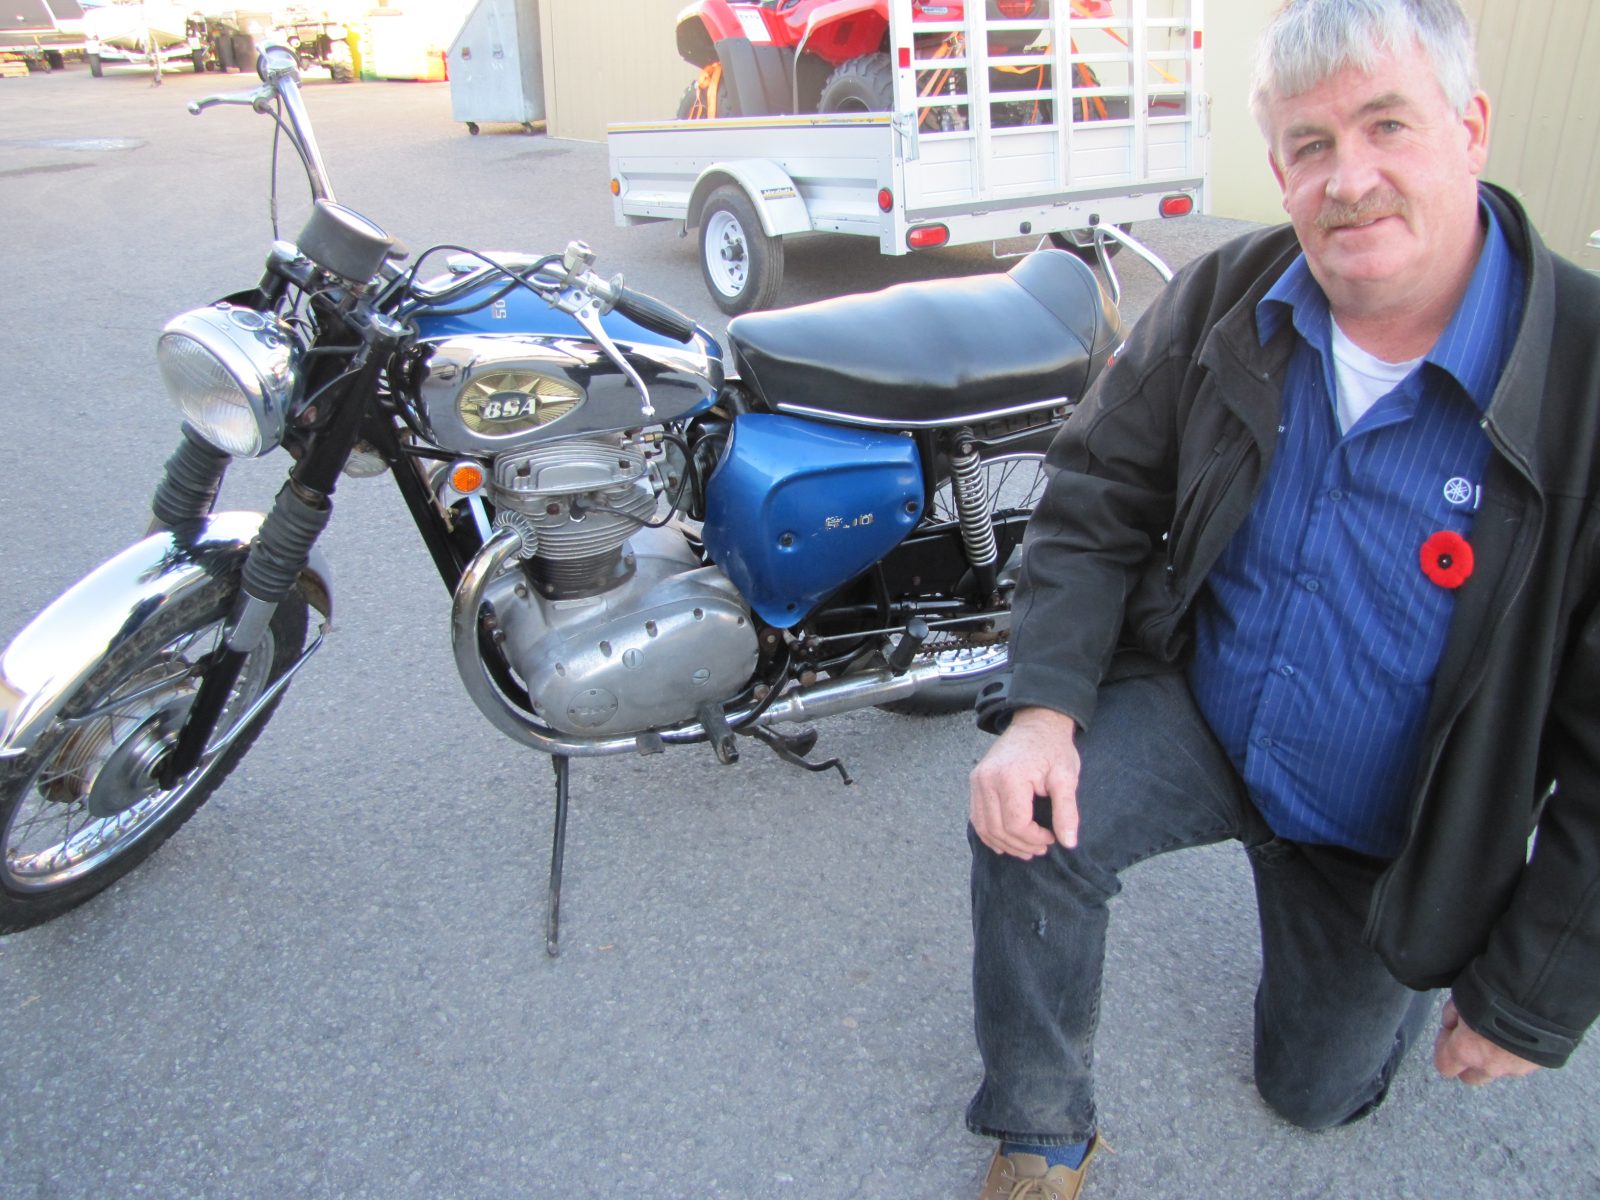 FAMILY BUSINESS: Bert Irwin inducted into Canadian Motorcycle Hall of Fame